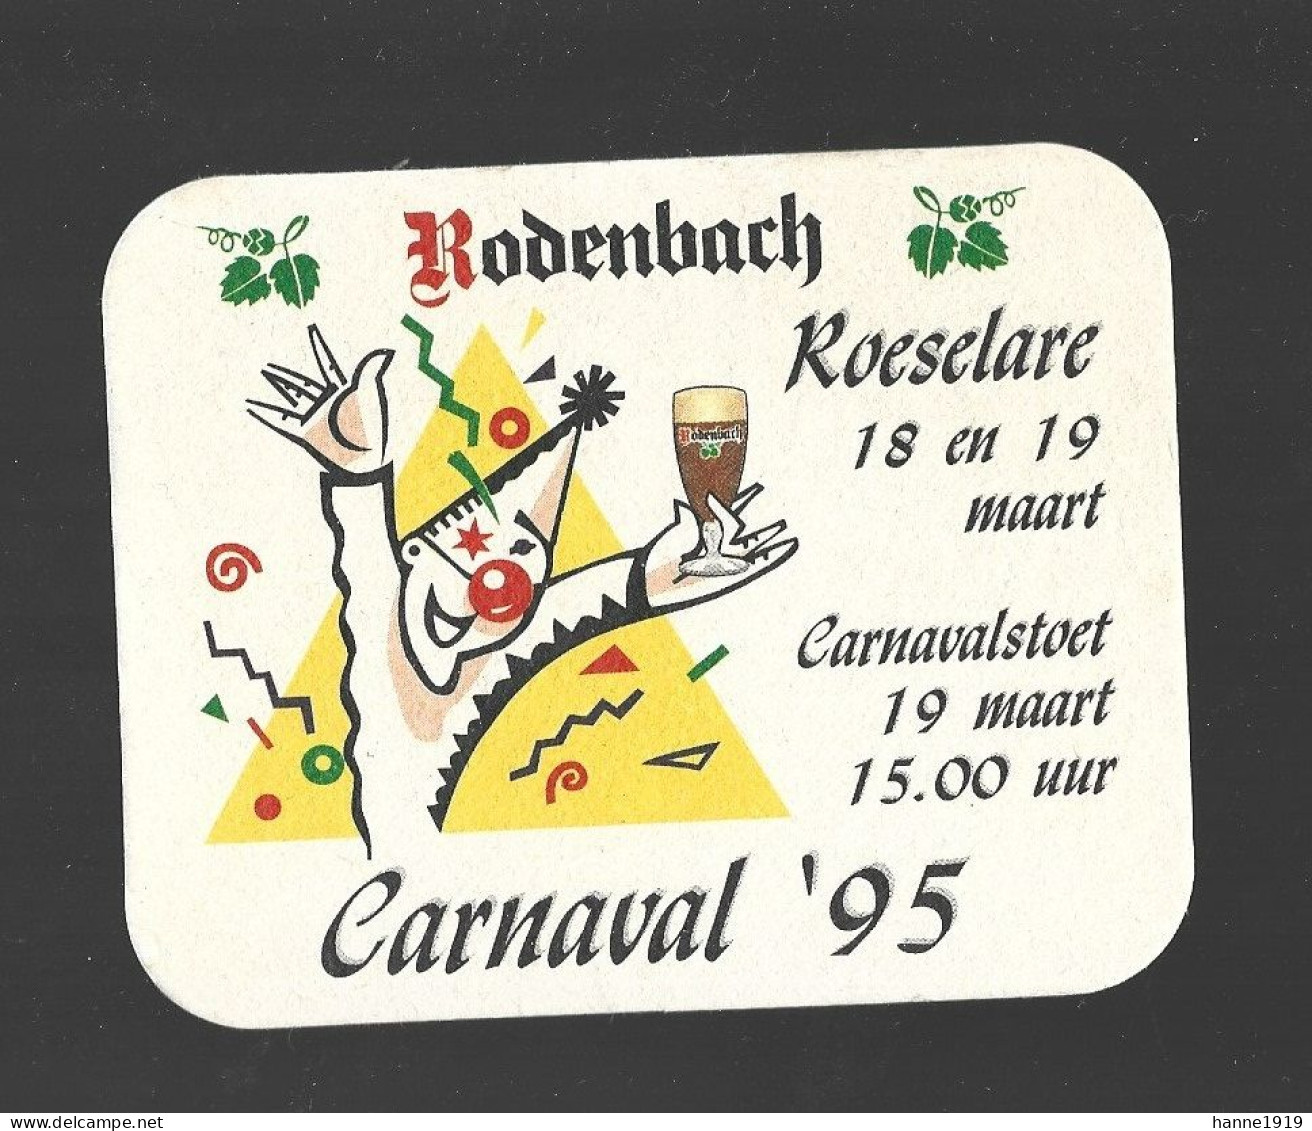 Roeselare Rodenbach Carnaval 1995 Bierviltje Beer Coaster Htje - Sotto-boccale